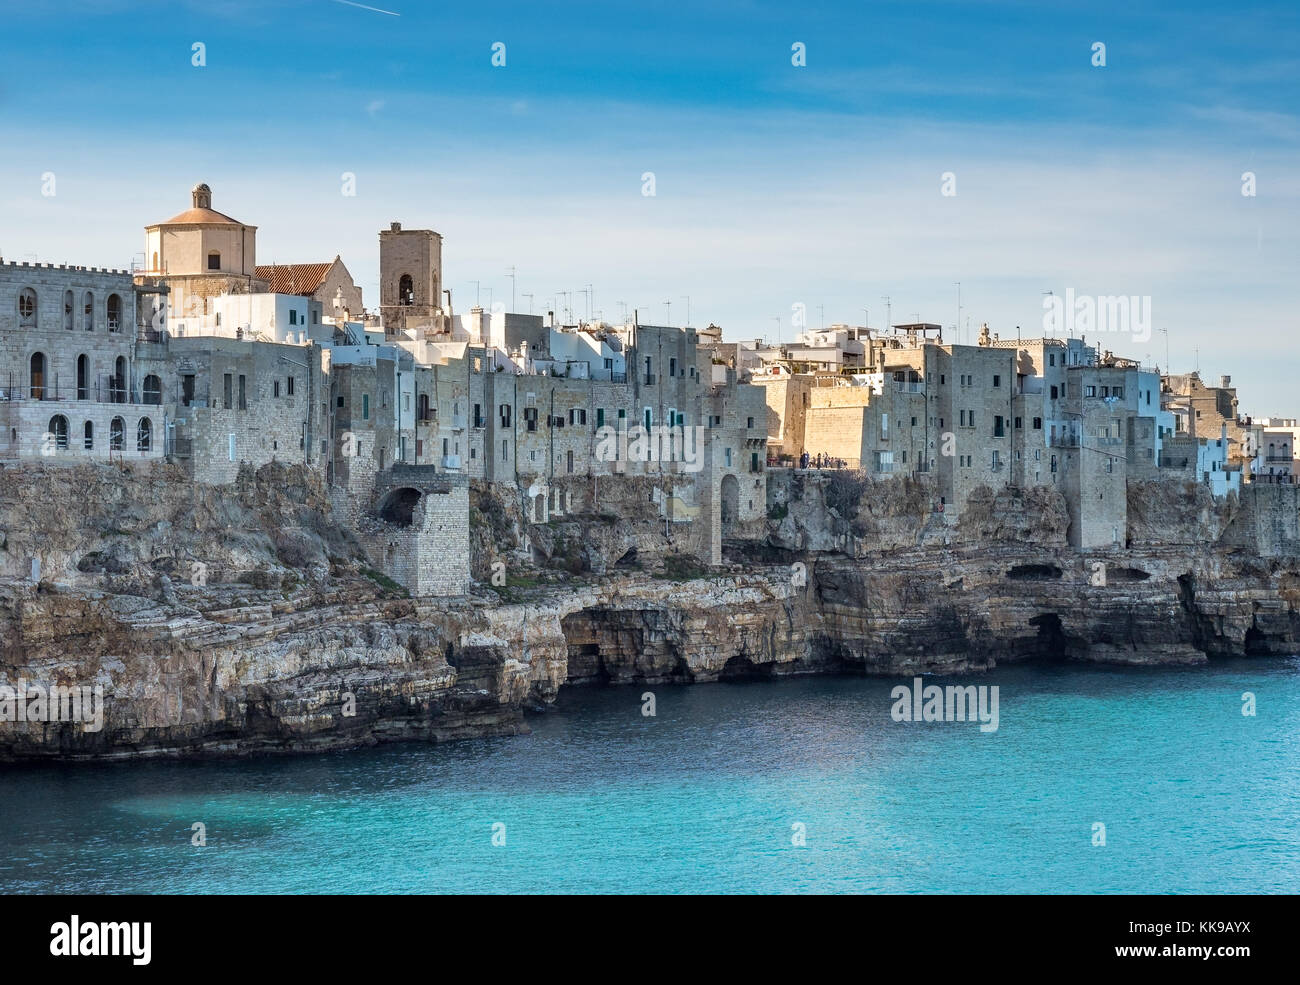 Capture from the beautiful town and tourist destination Polignano, Southern Italy. November 2017 Stock Photo